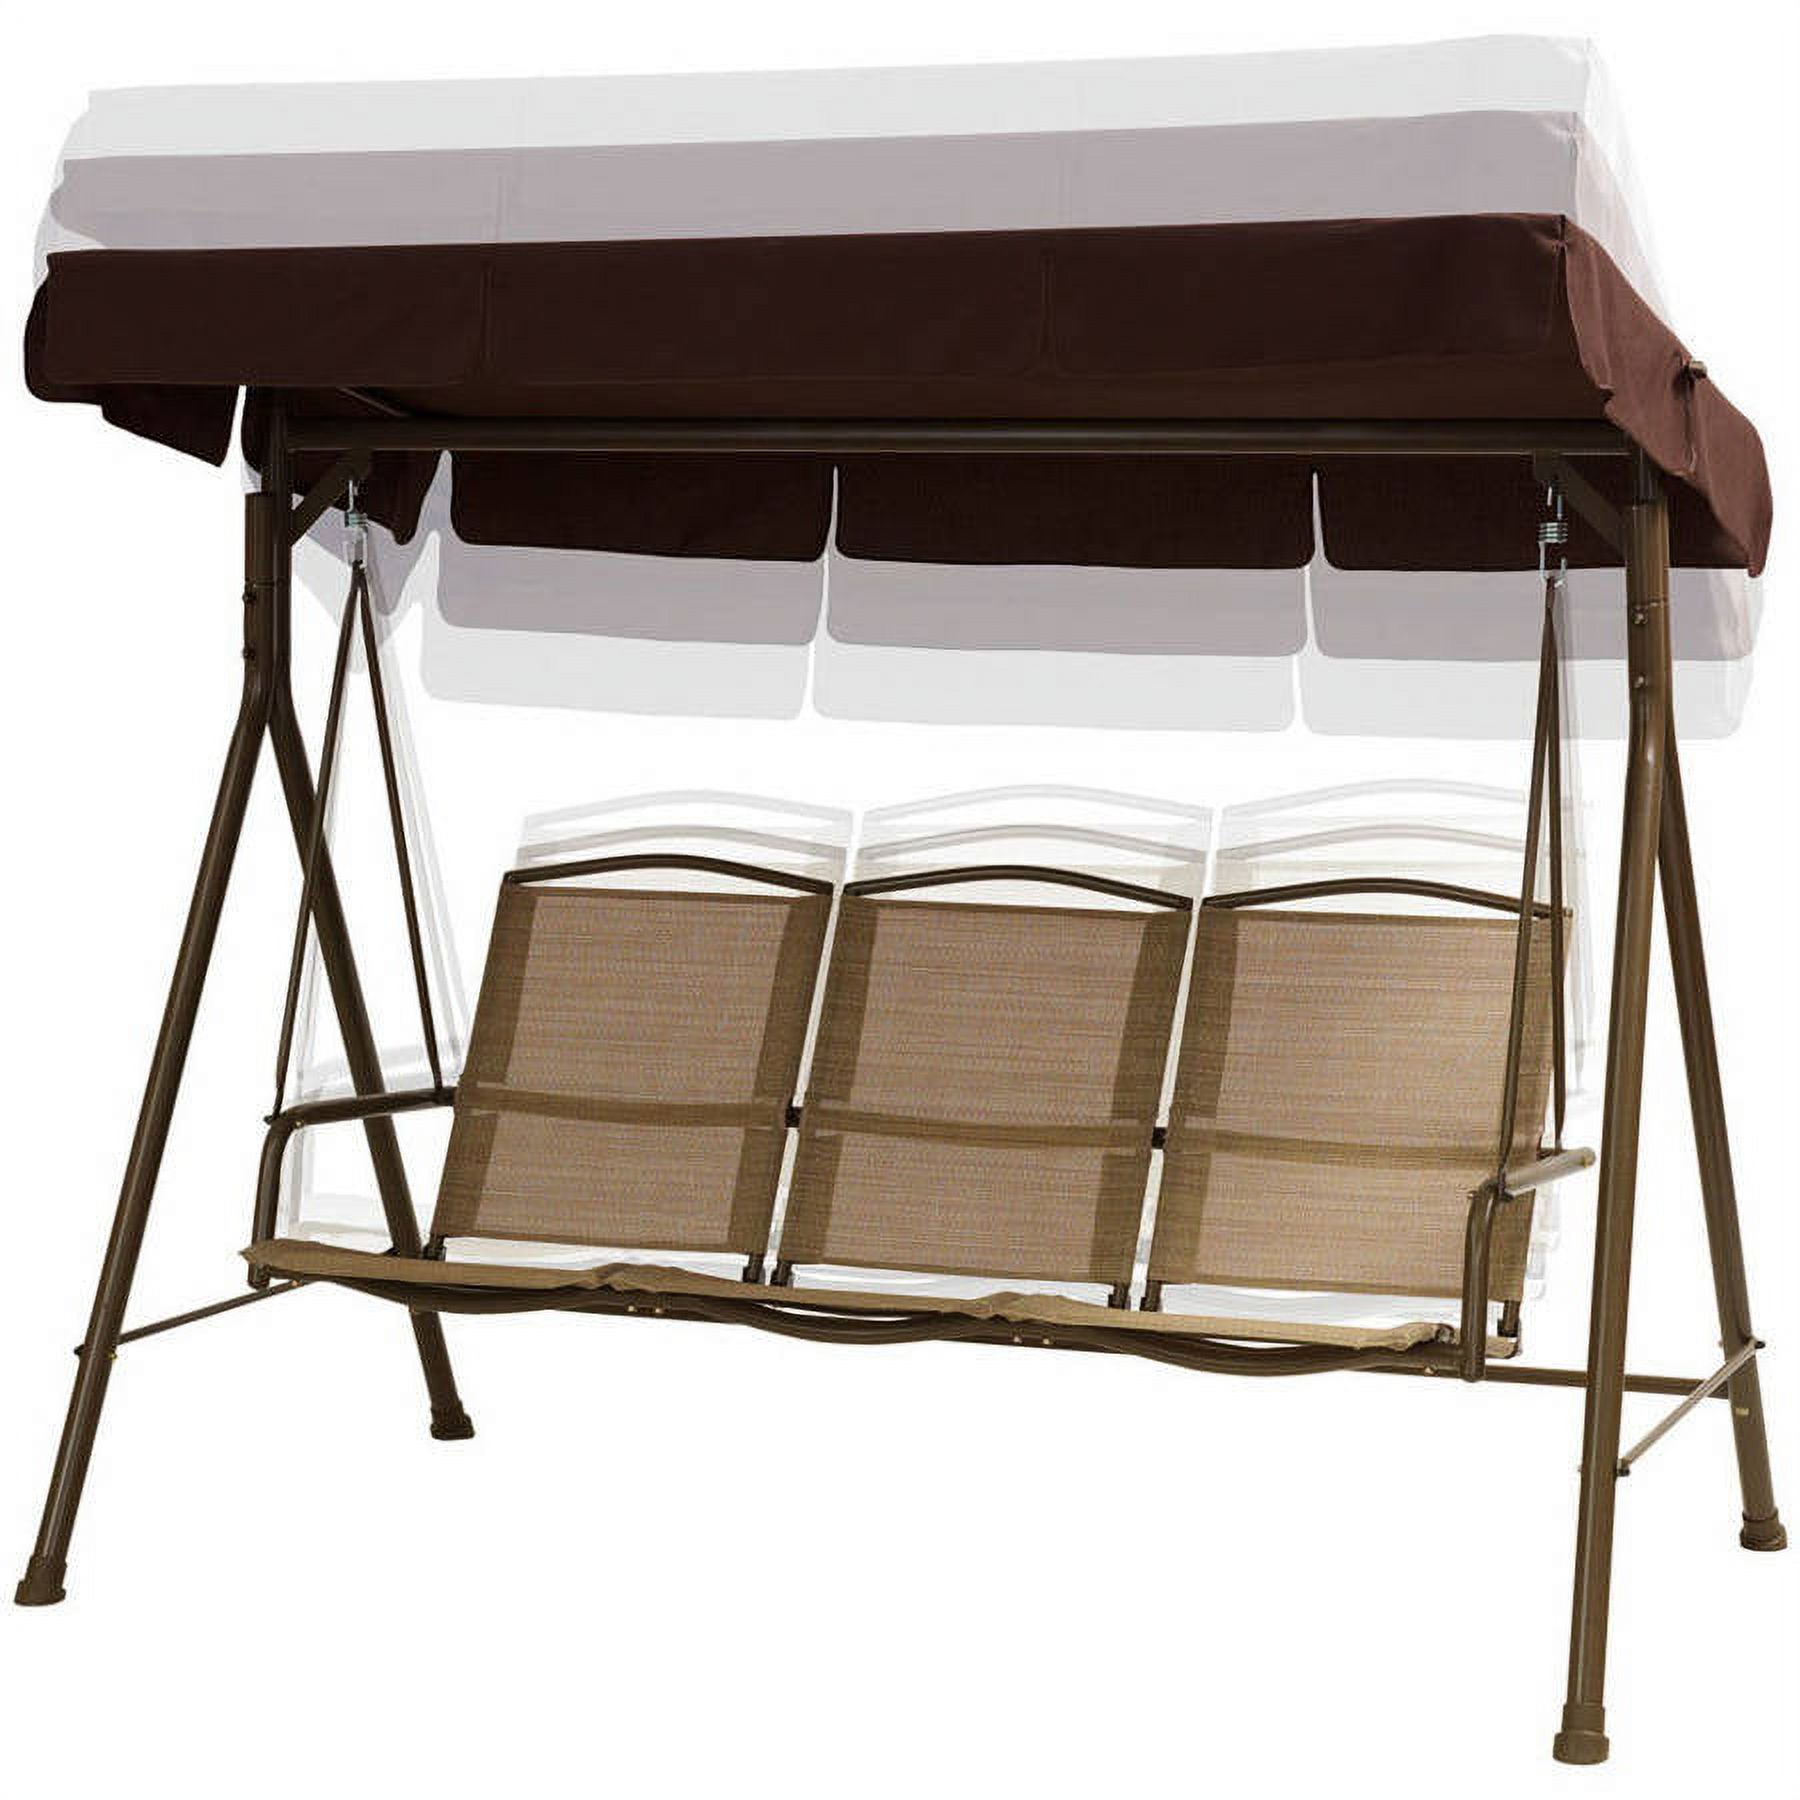 Mainstays Sand Dune 3-Person Outdoor Sling Canopy Porch Swing with Canopy, Dune - image 2 of 6